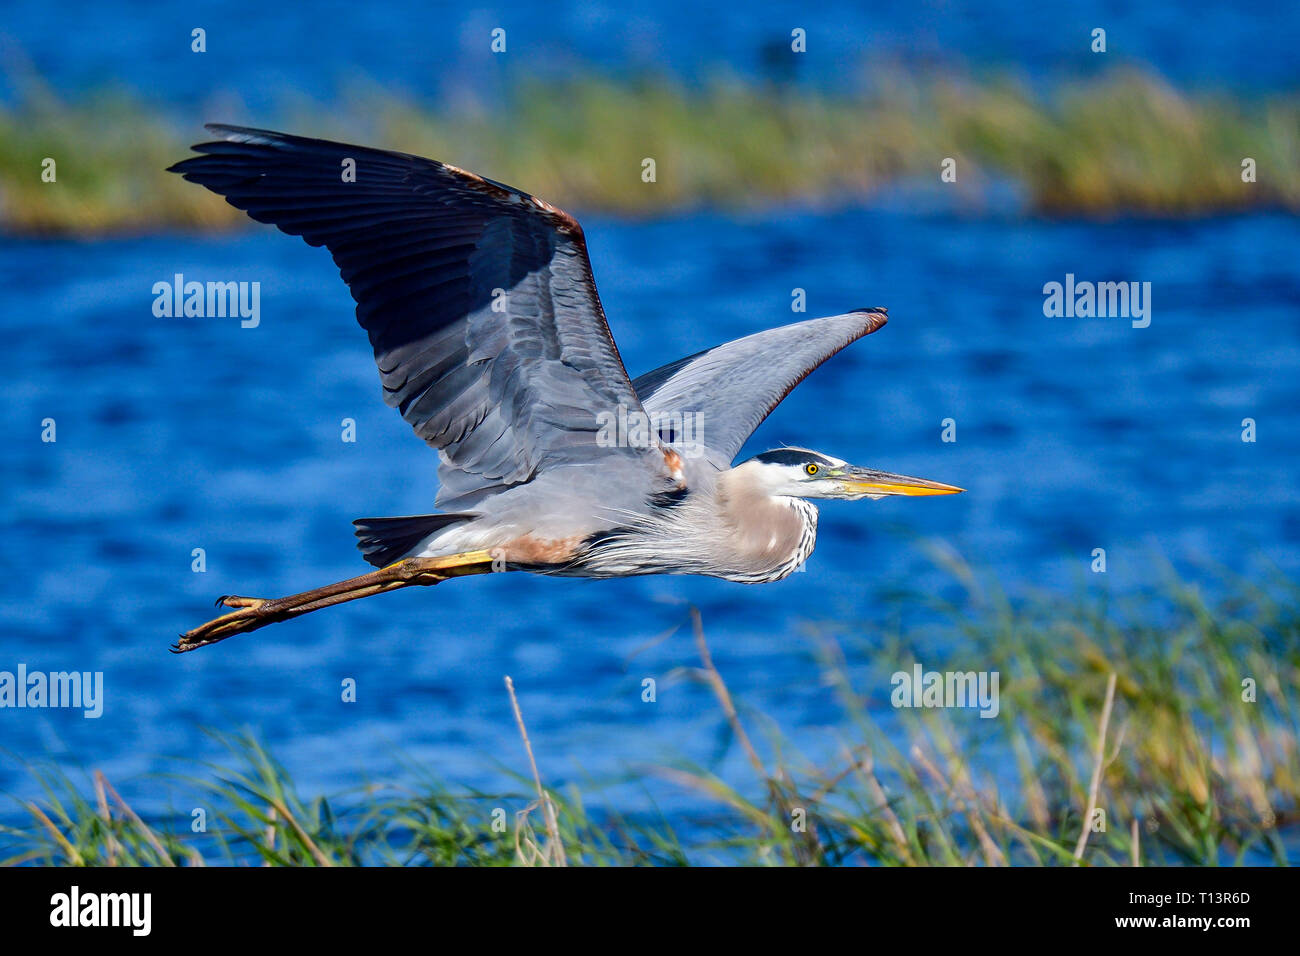 Great Blue Heron gliding over water. Stock Photo